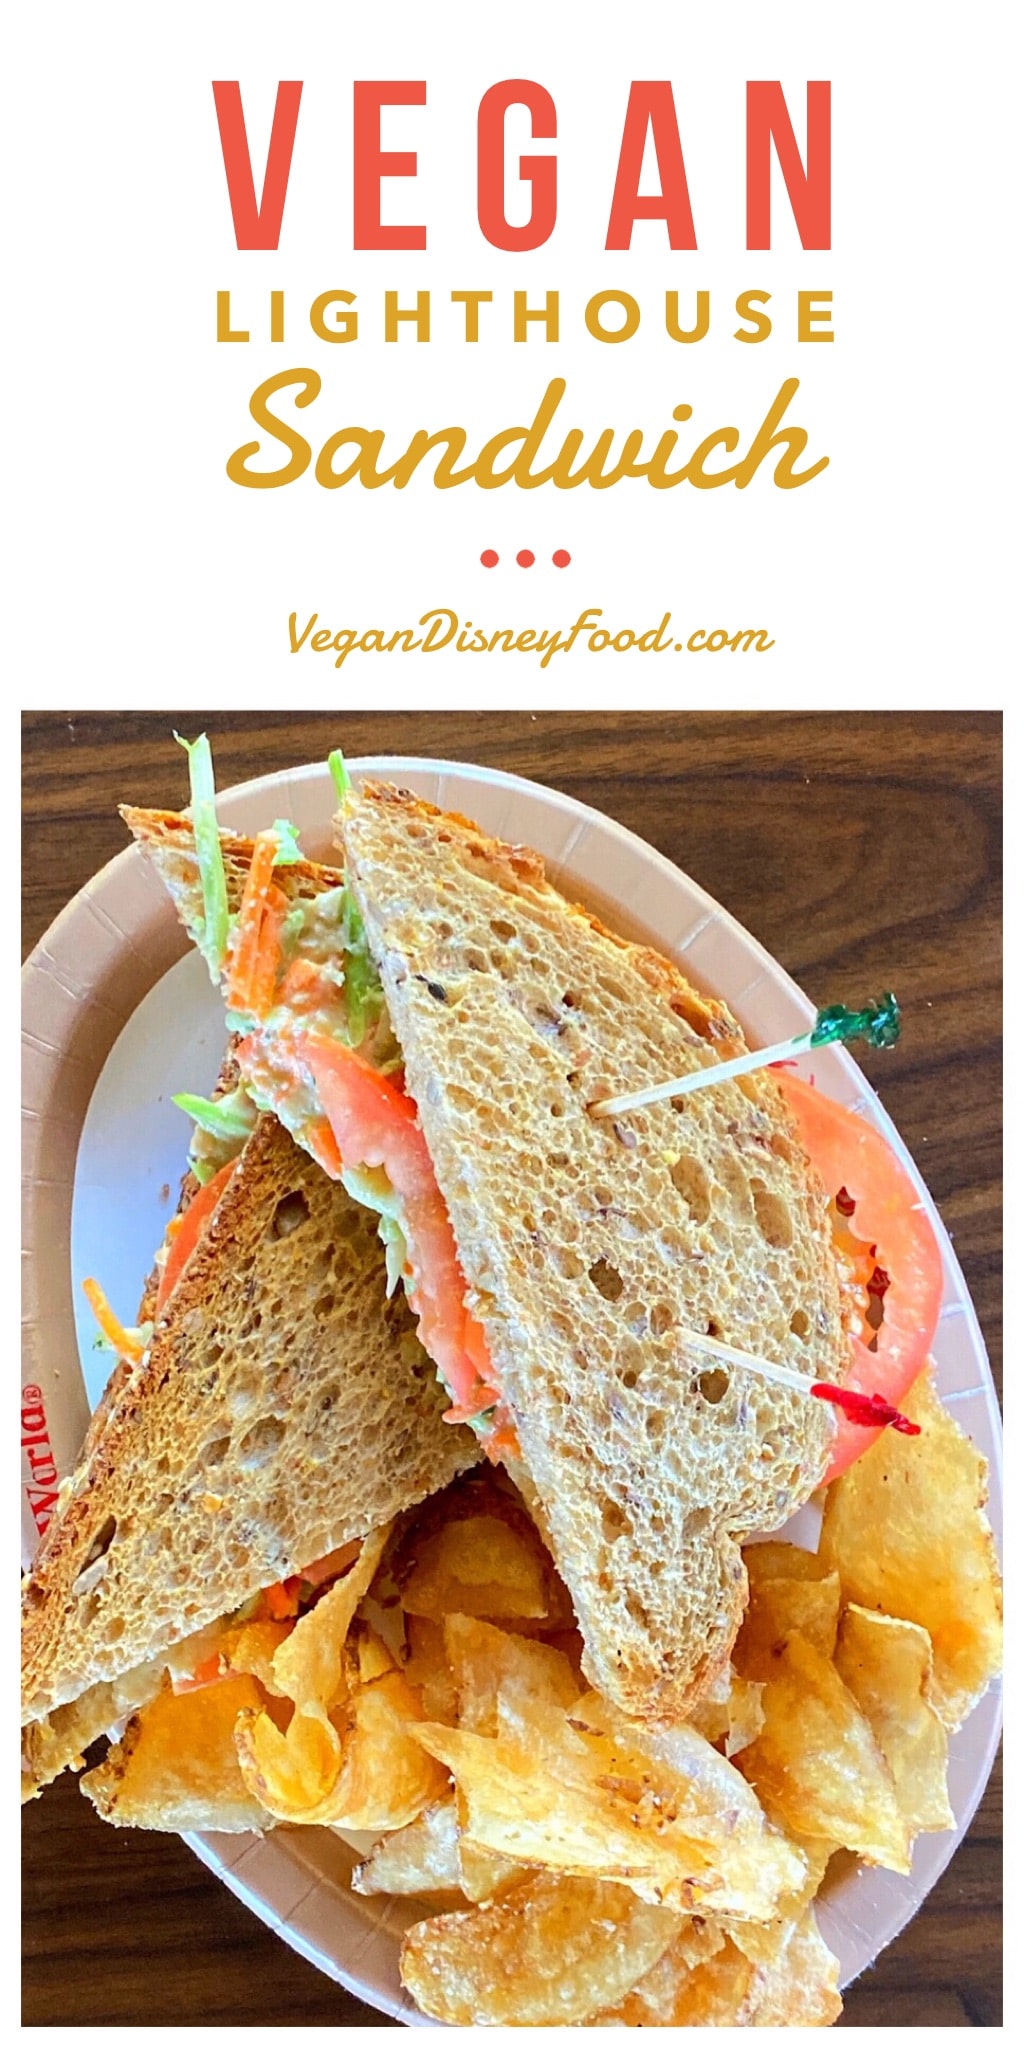 Vegan Lighthouse Sandwich at Columbia Harbour House in the Magic Kingdom at Walt Disney World